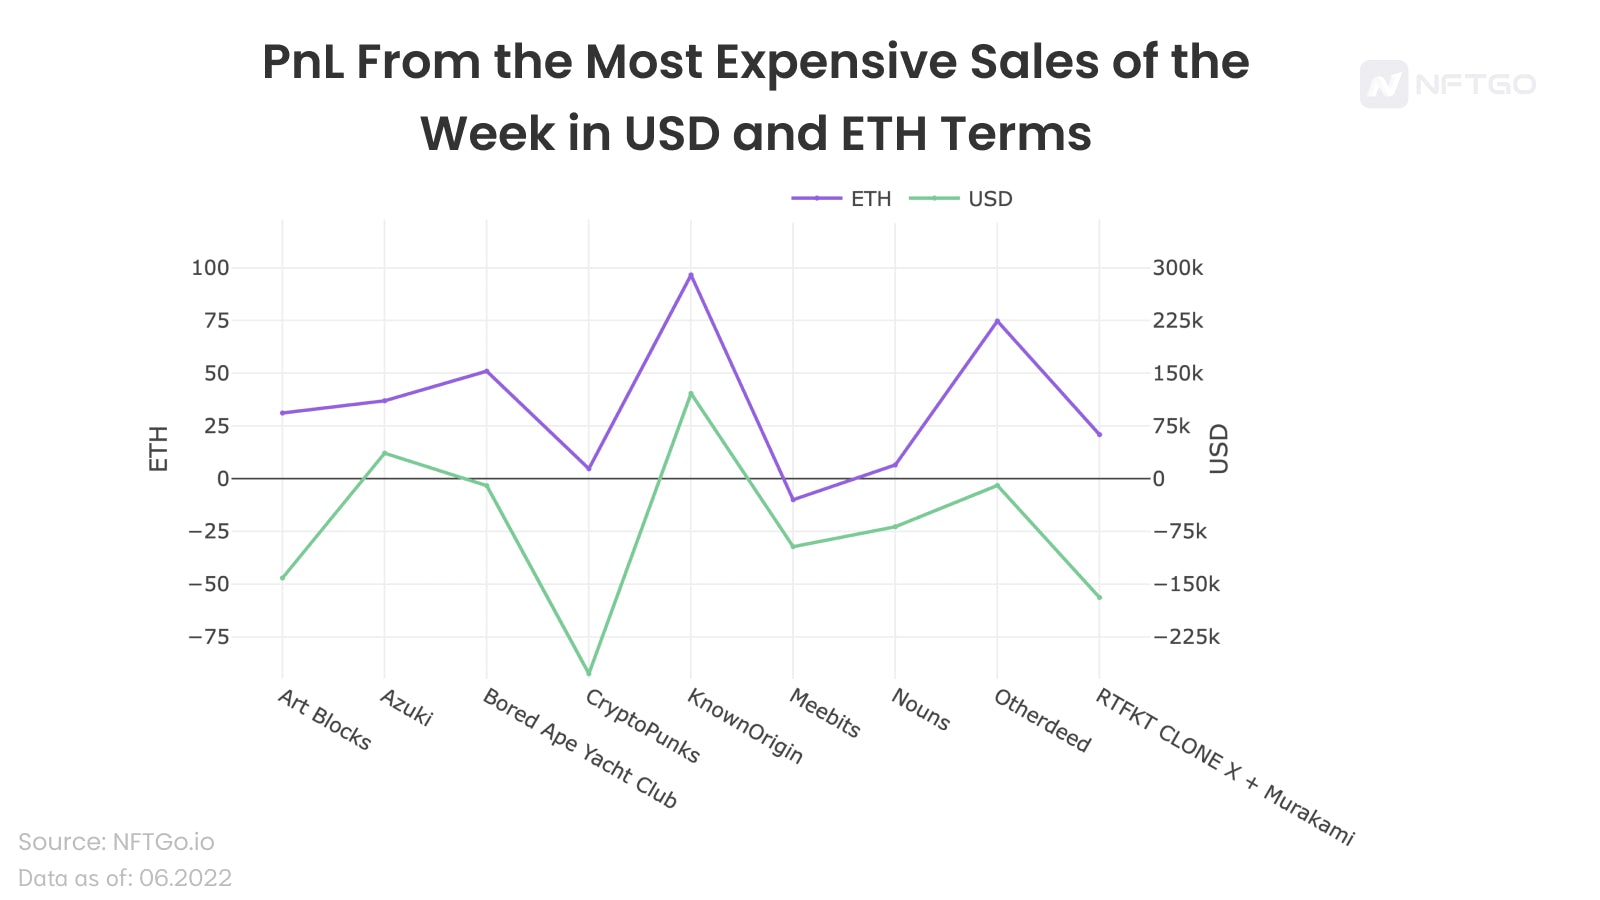 PnL From the Most Expensive Sales of the Week in USD and ETH Terms